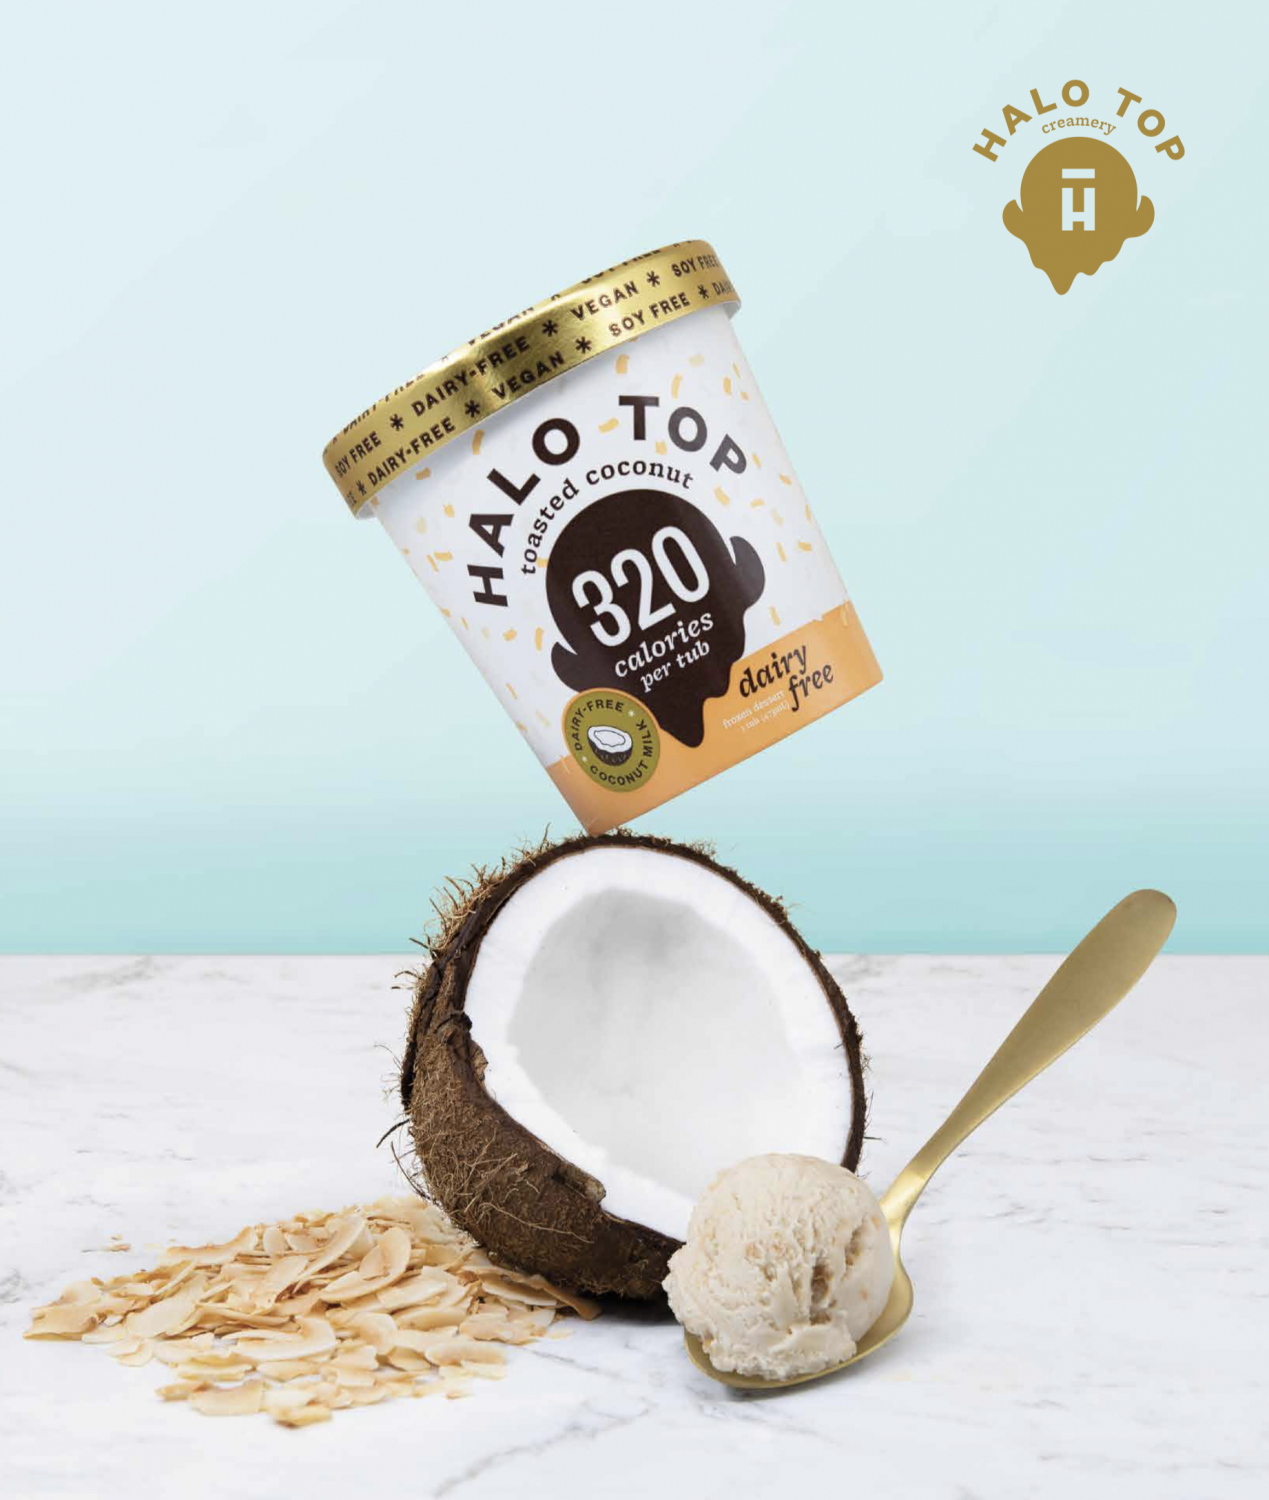 Creative Agency for Halo Top